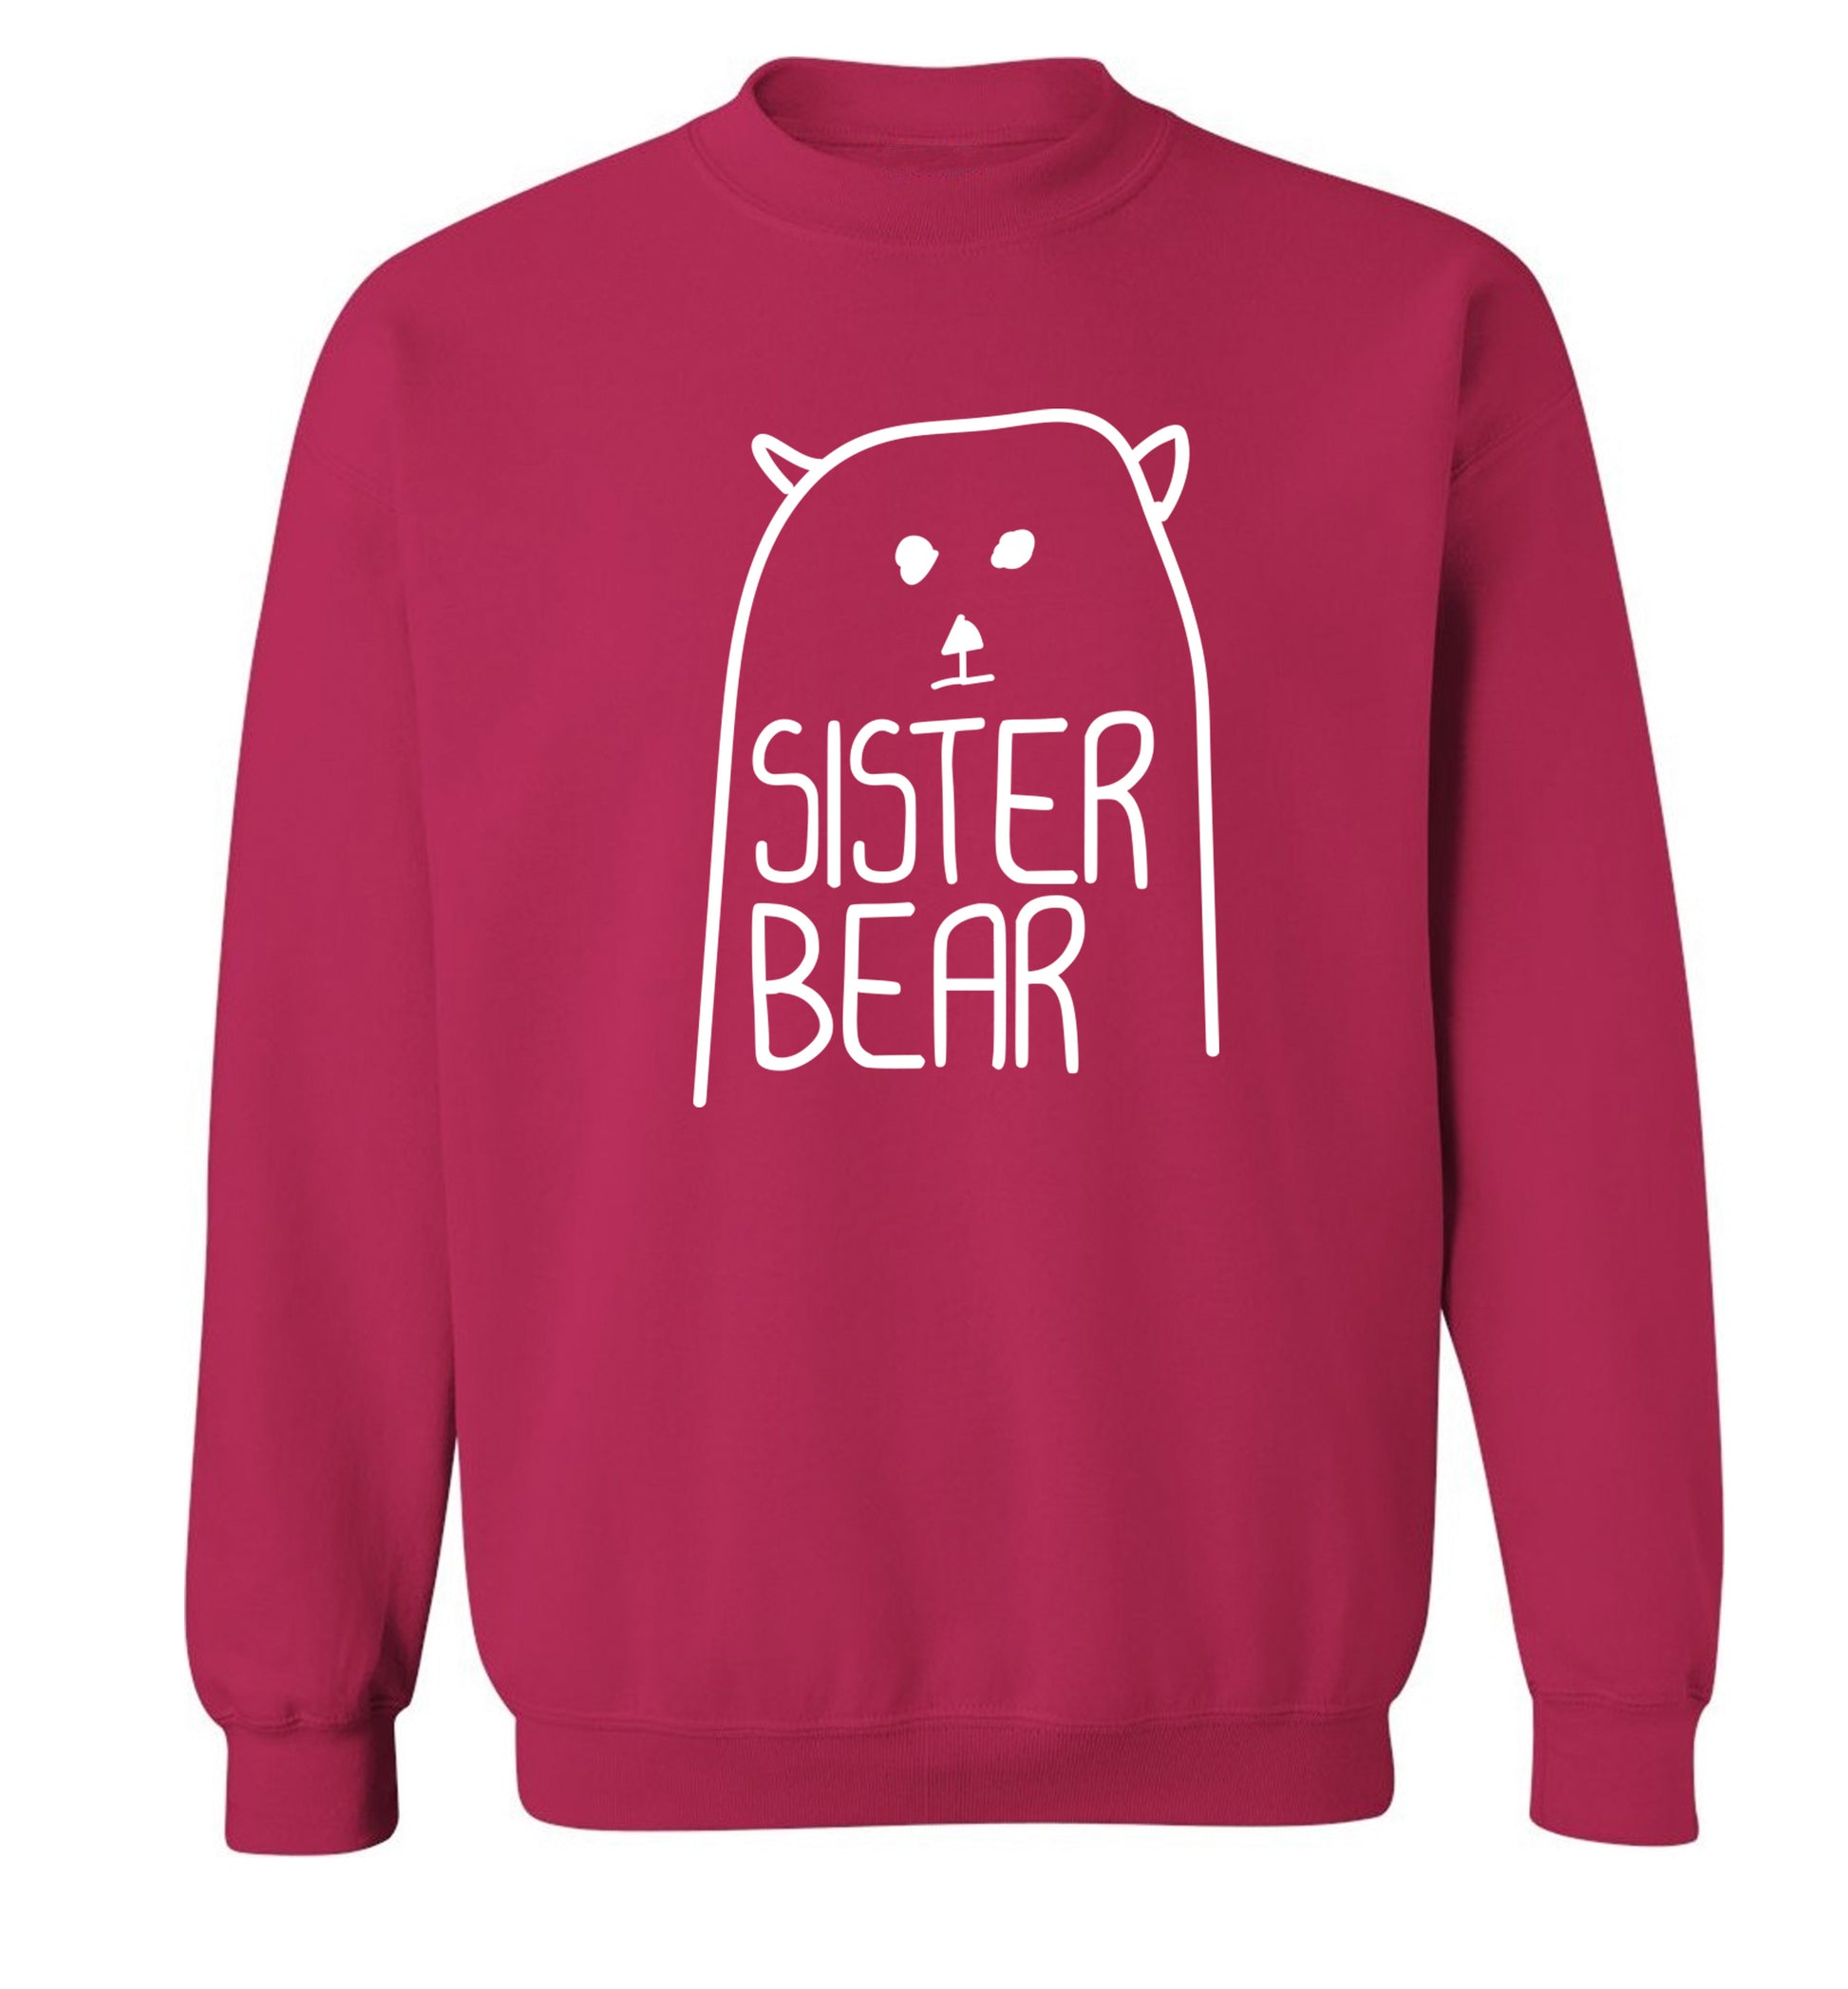 Sister bear Adult's unisex pink Sweater 2XL